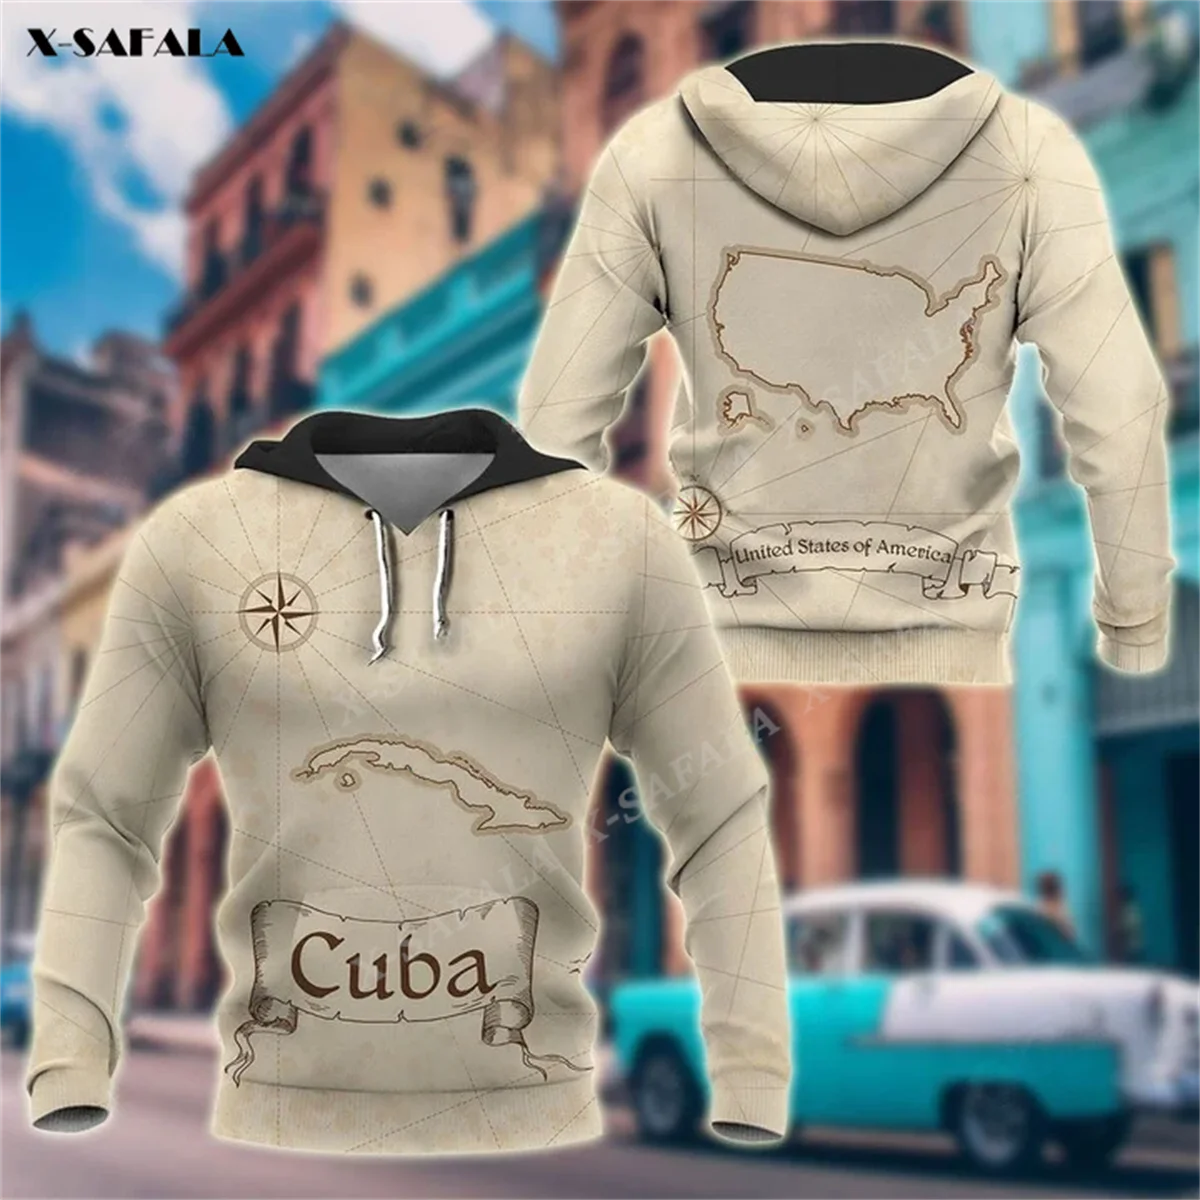 

Cuba COAT OF ARMS Map Flag Classical 3D Printed Zipper Hoodie Men Pullover Sweatshirt Hooded Jersey Tracksuits Outwear Coat